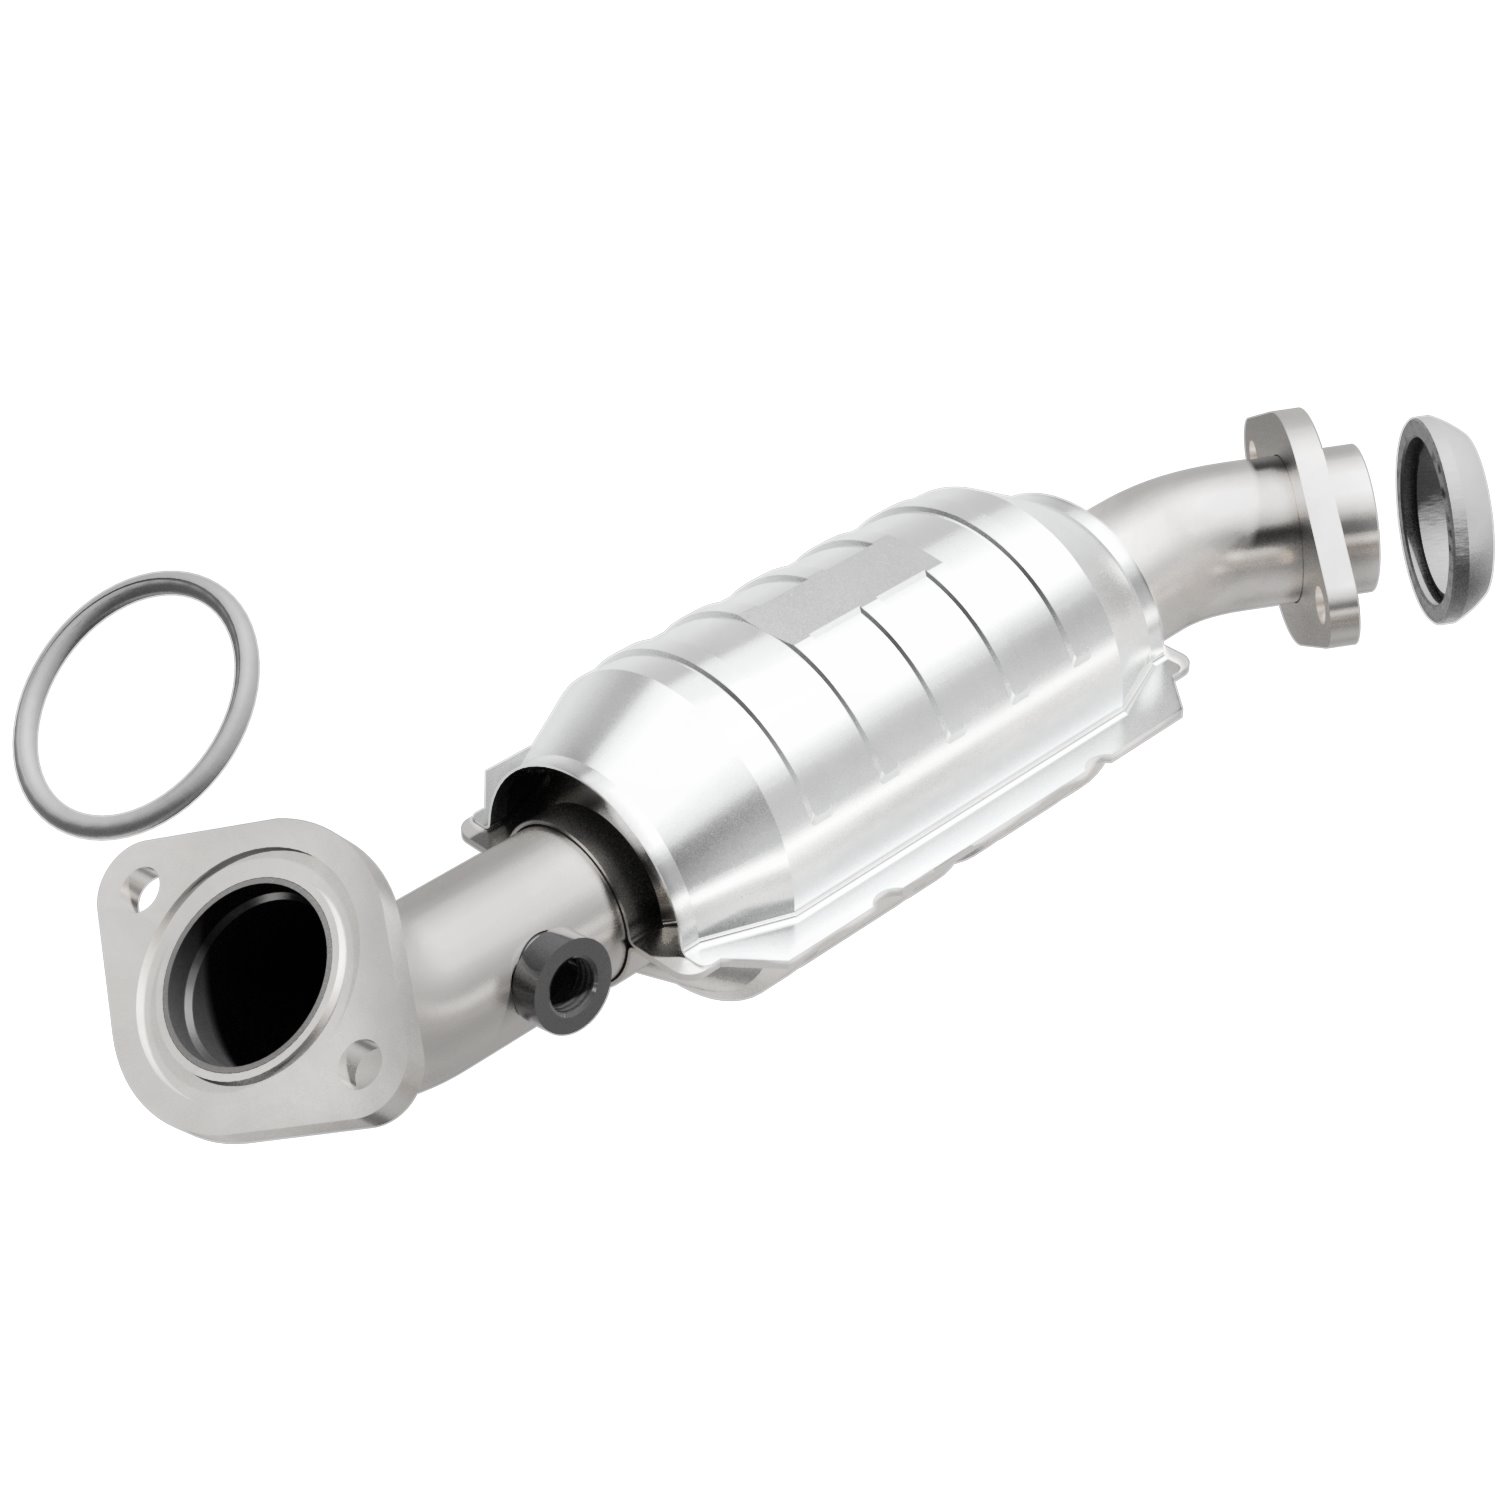 2004-2009 Cadillac CTS HM Grade Federal / EPA Compliant Direct-Fit Catalytic Converter